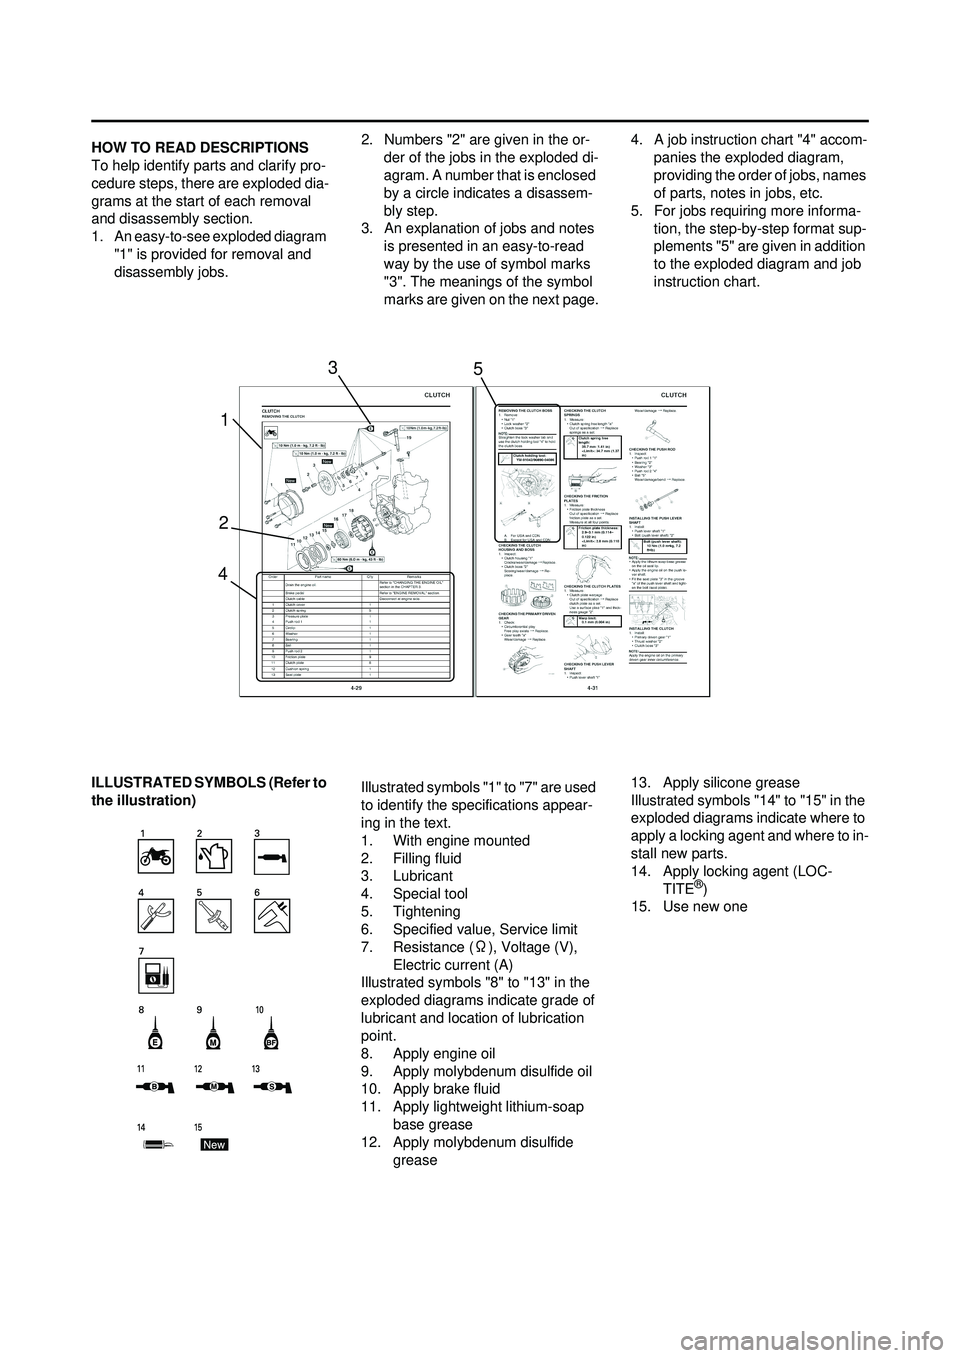 YAMAHA WR 250F 2008  Owners Manual HOW TO READ DESCRIPTIONS
To help identify parts and clarify pro-
cedure steps, there are exploded dia-
grams at the start of each removal 
and disassembly section.
1. An easy-to-see exploded diagram "